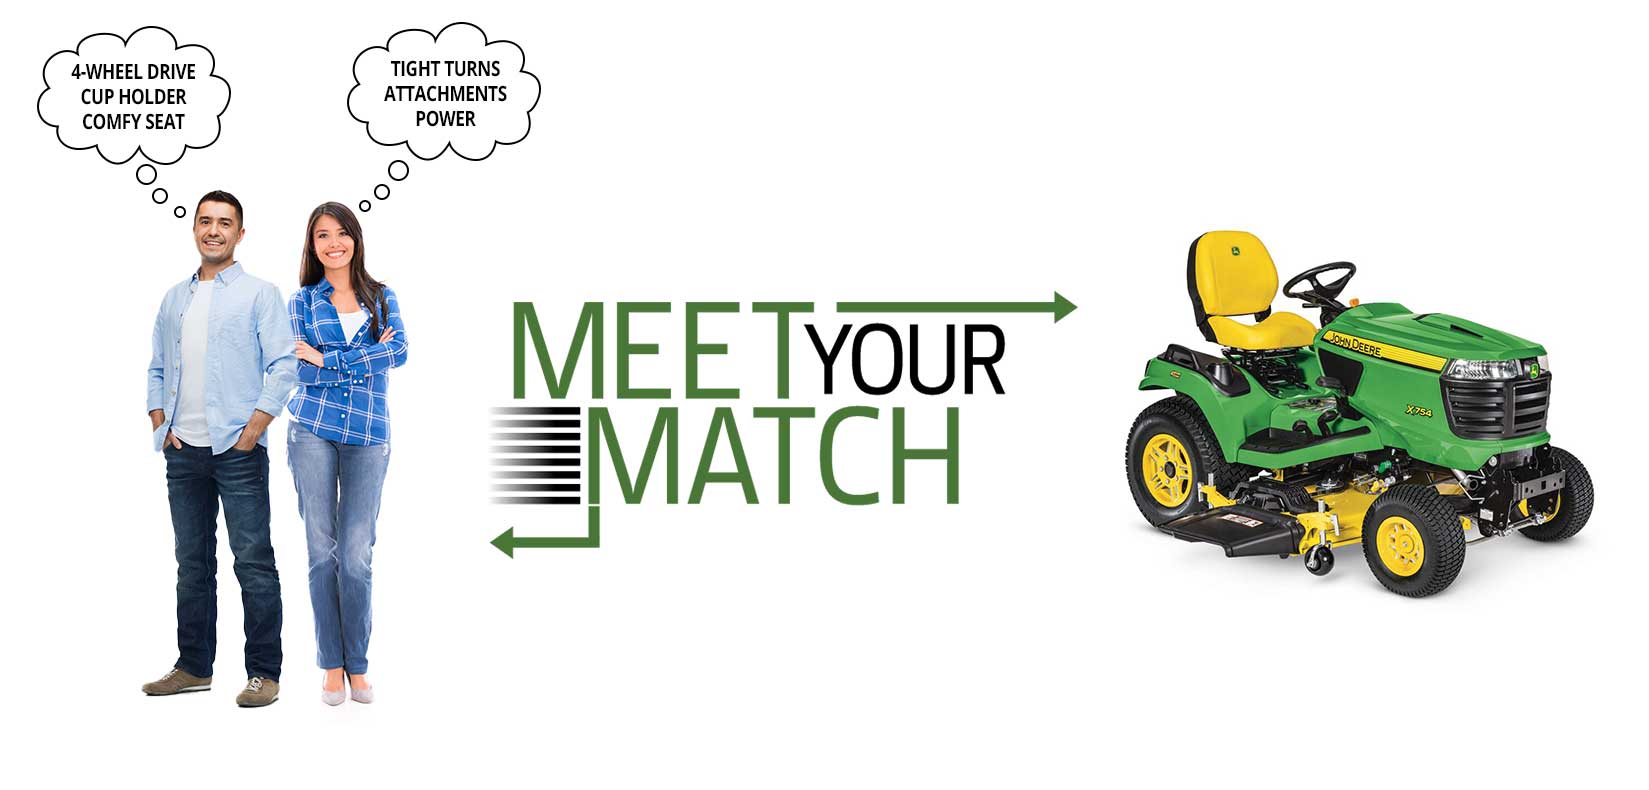 Meet Your Match - Find a John Deere Lawn Tractor to fit your needs;